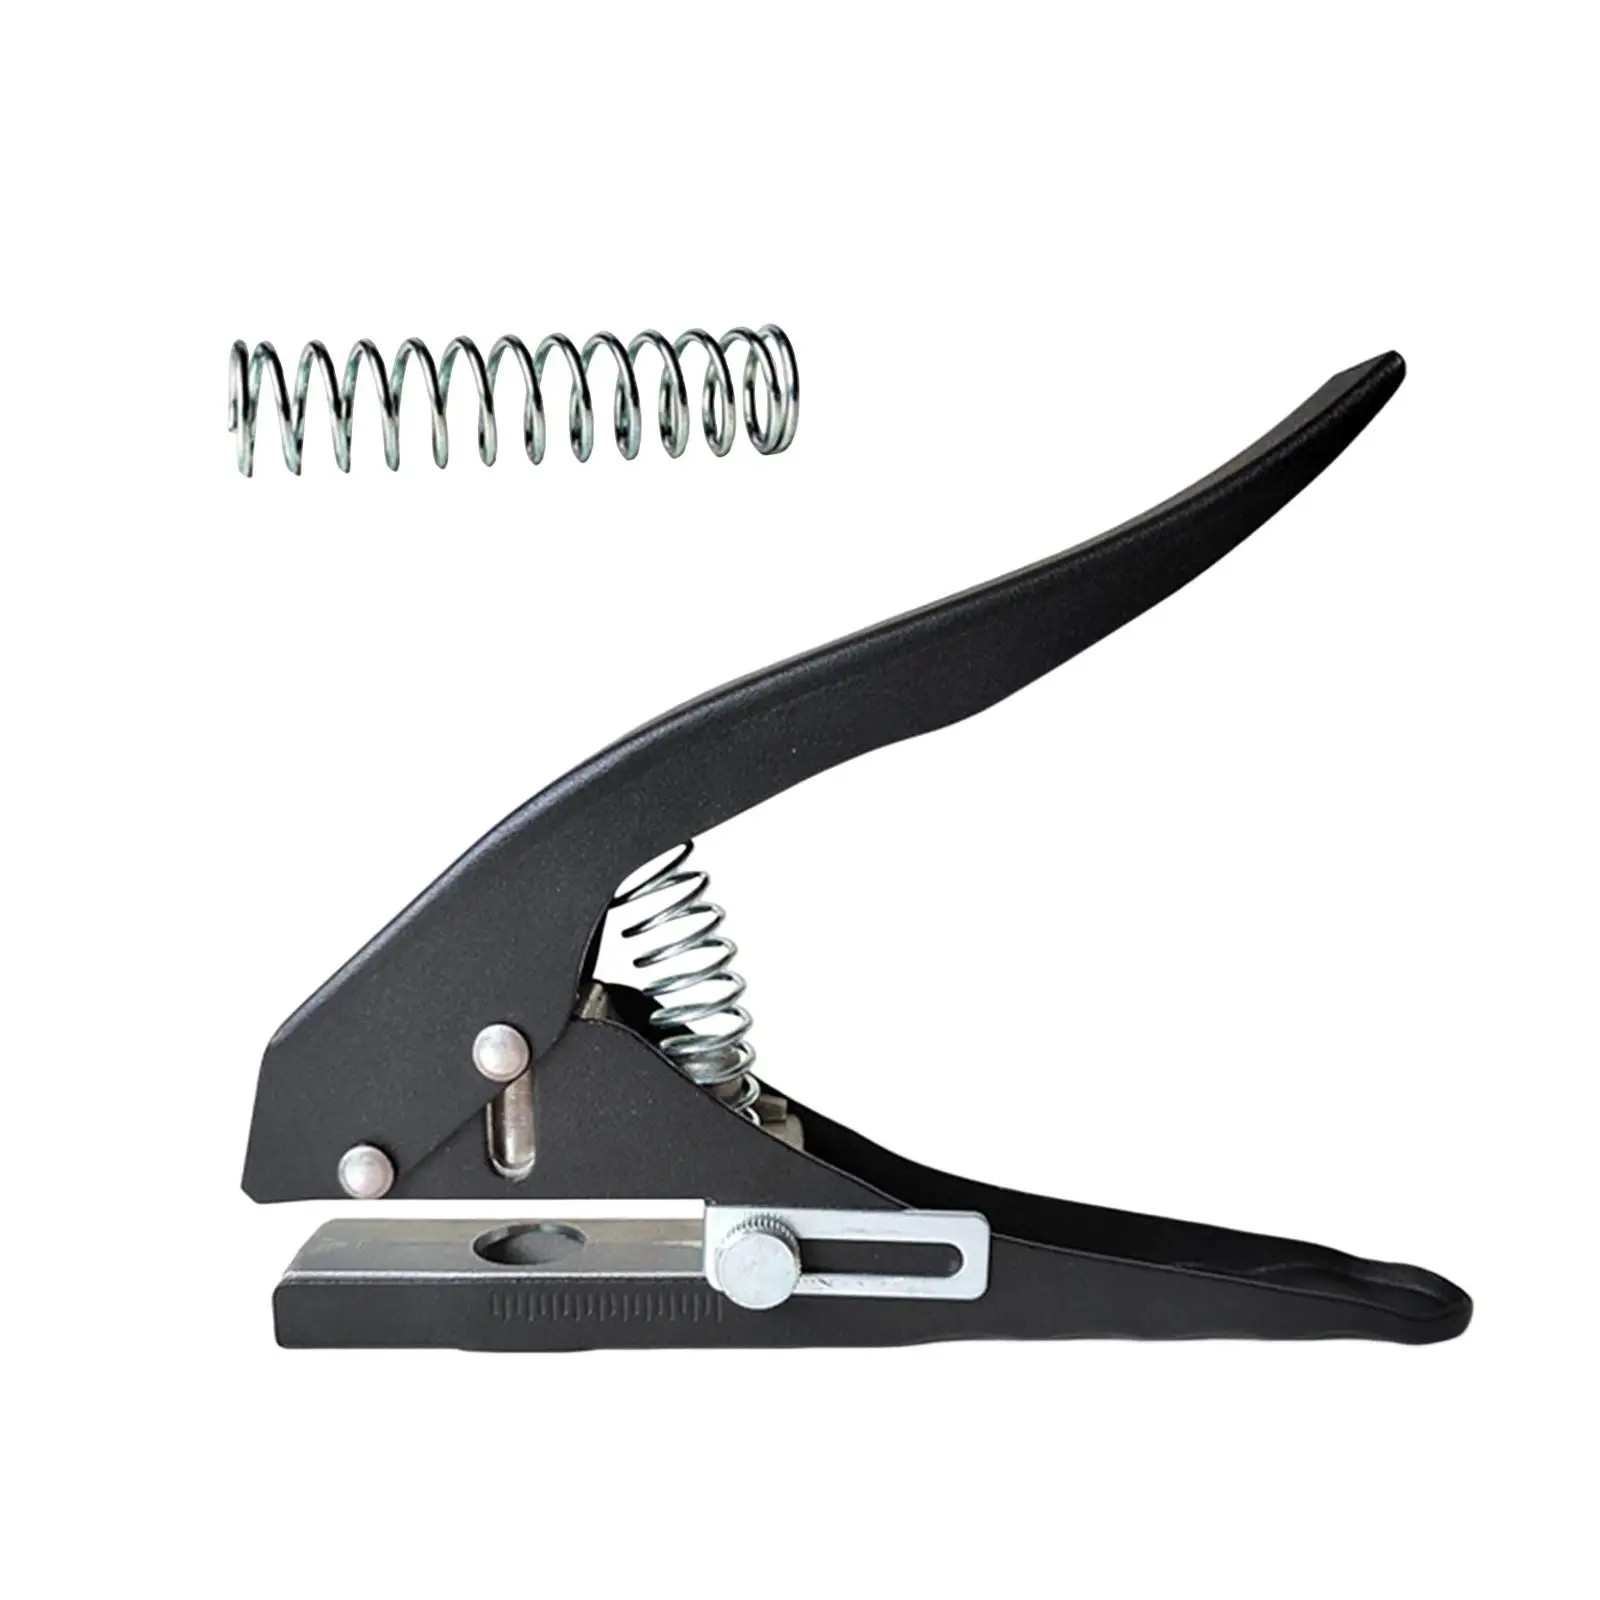 Edge Banding Hole Puncher Handheld Hole Punch Metal Heavy Duty Durable Punch Pliers for Card Scrapbooking Wood Veneer Tag Paper